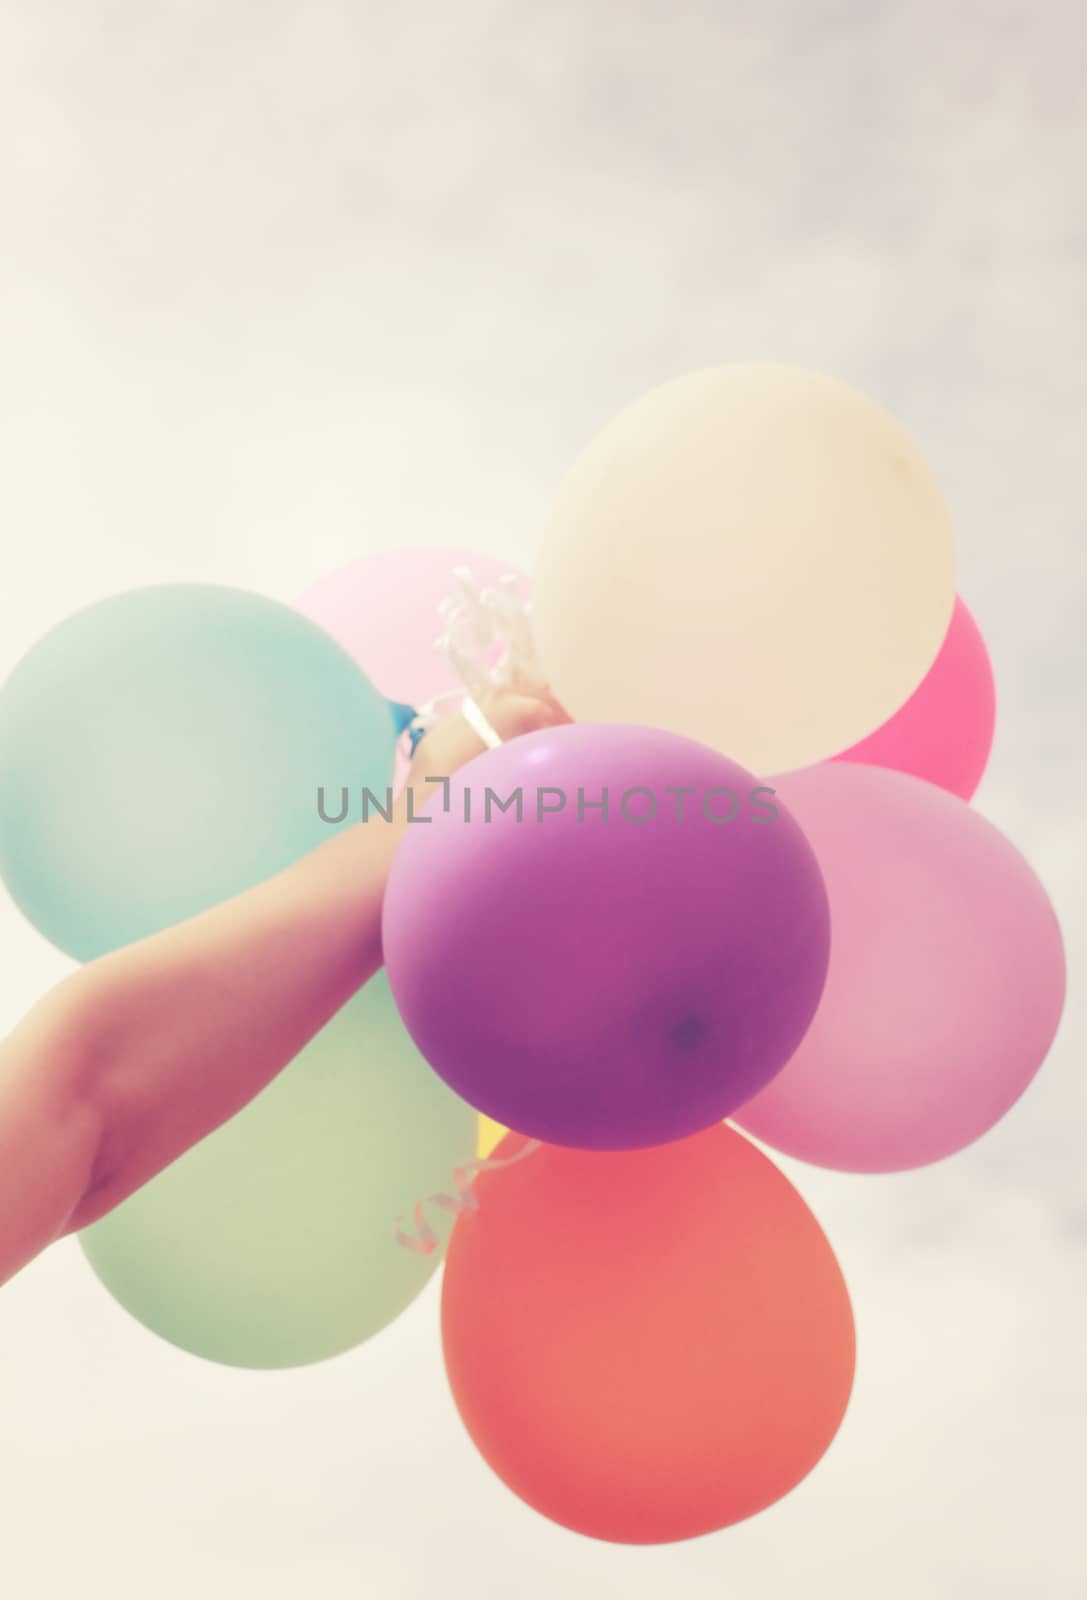 Hand holding multicolored balloons with retro filter effect by nuchylee